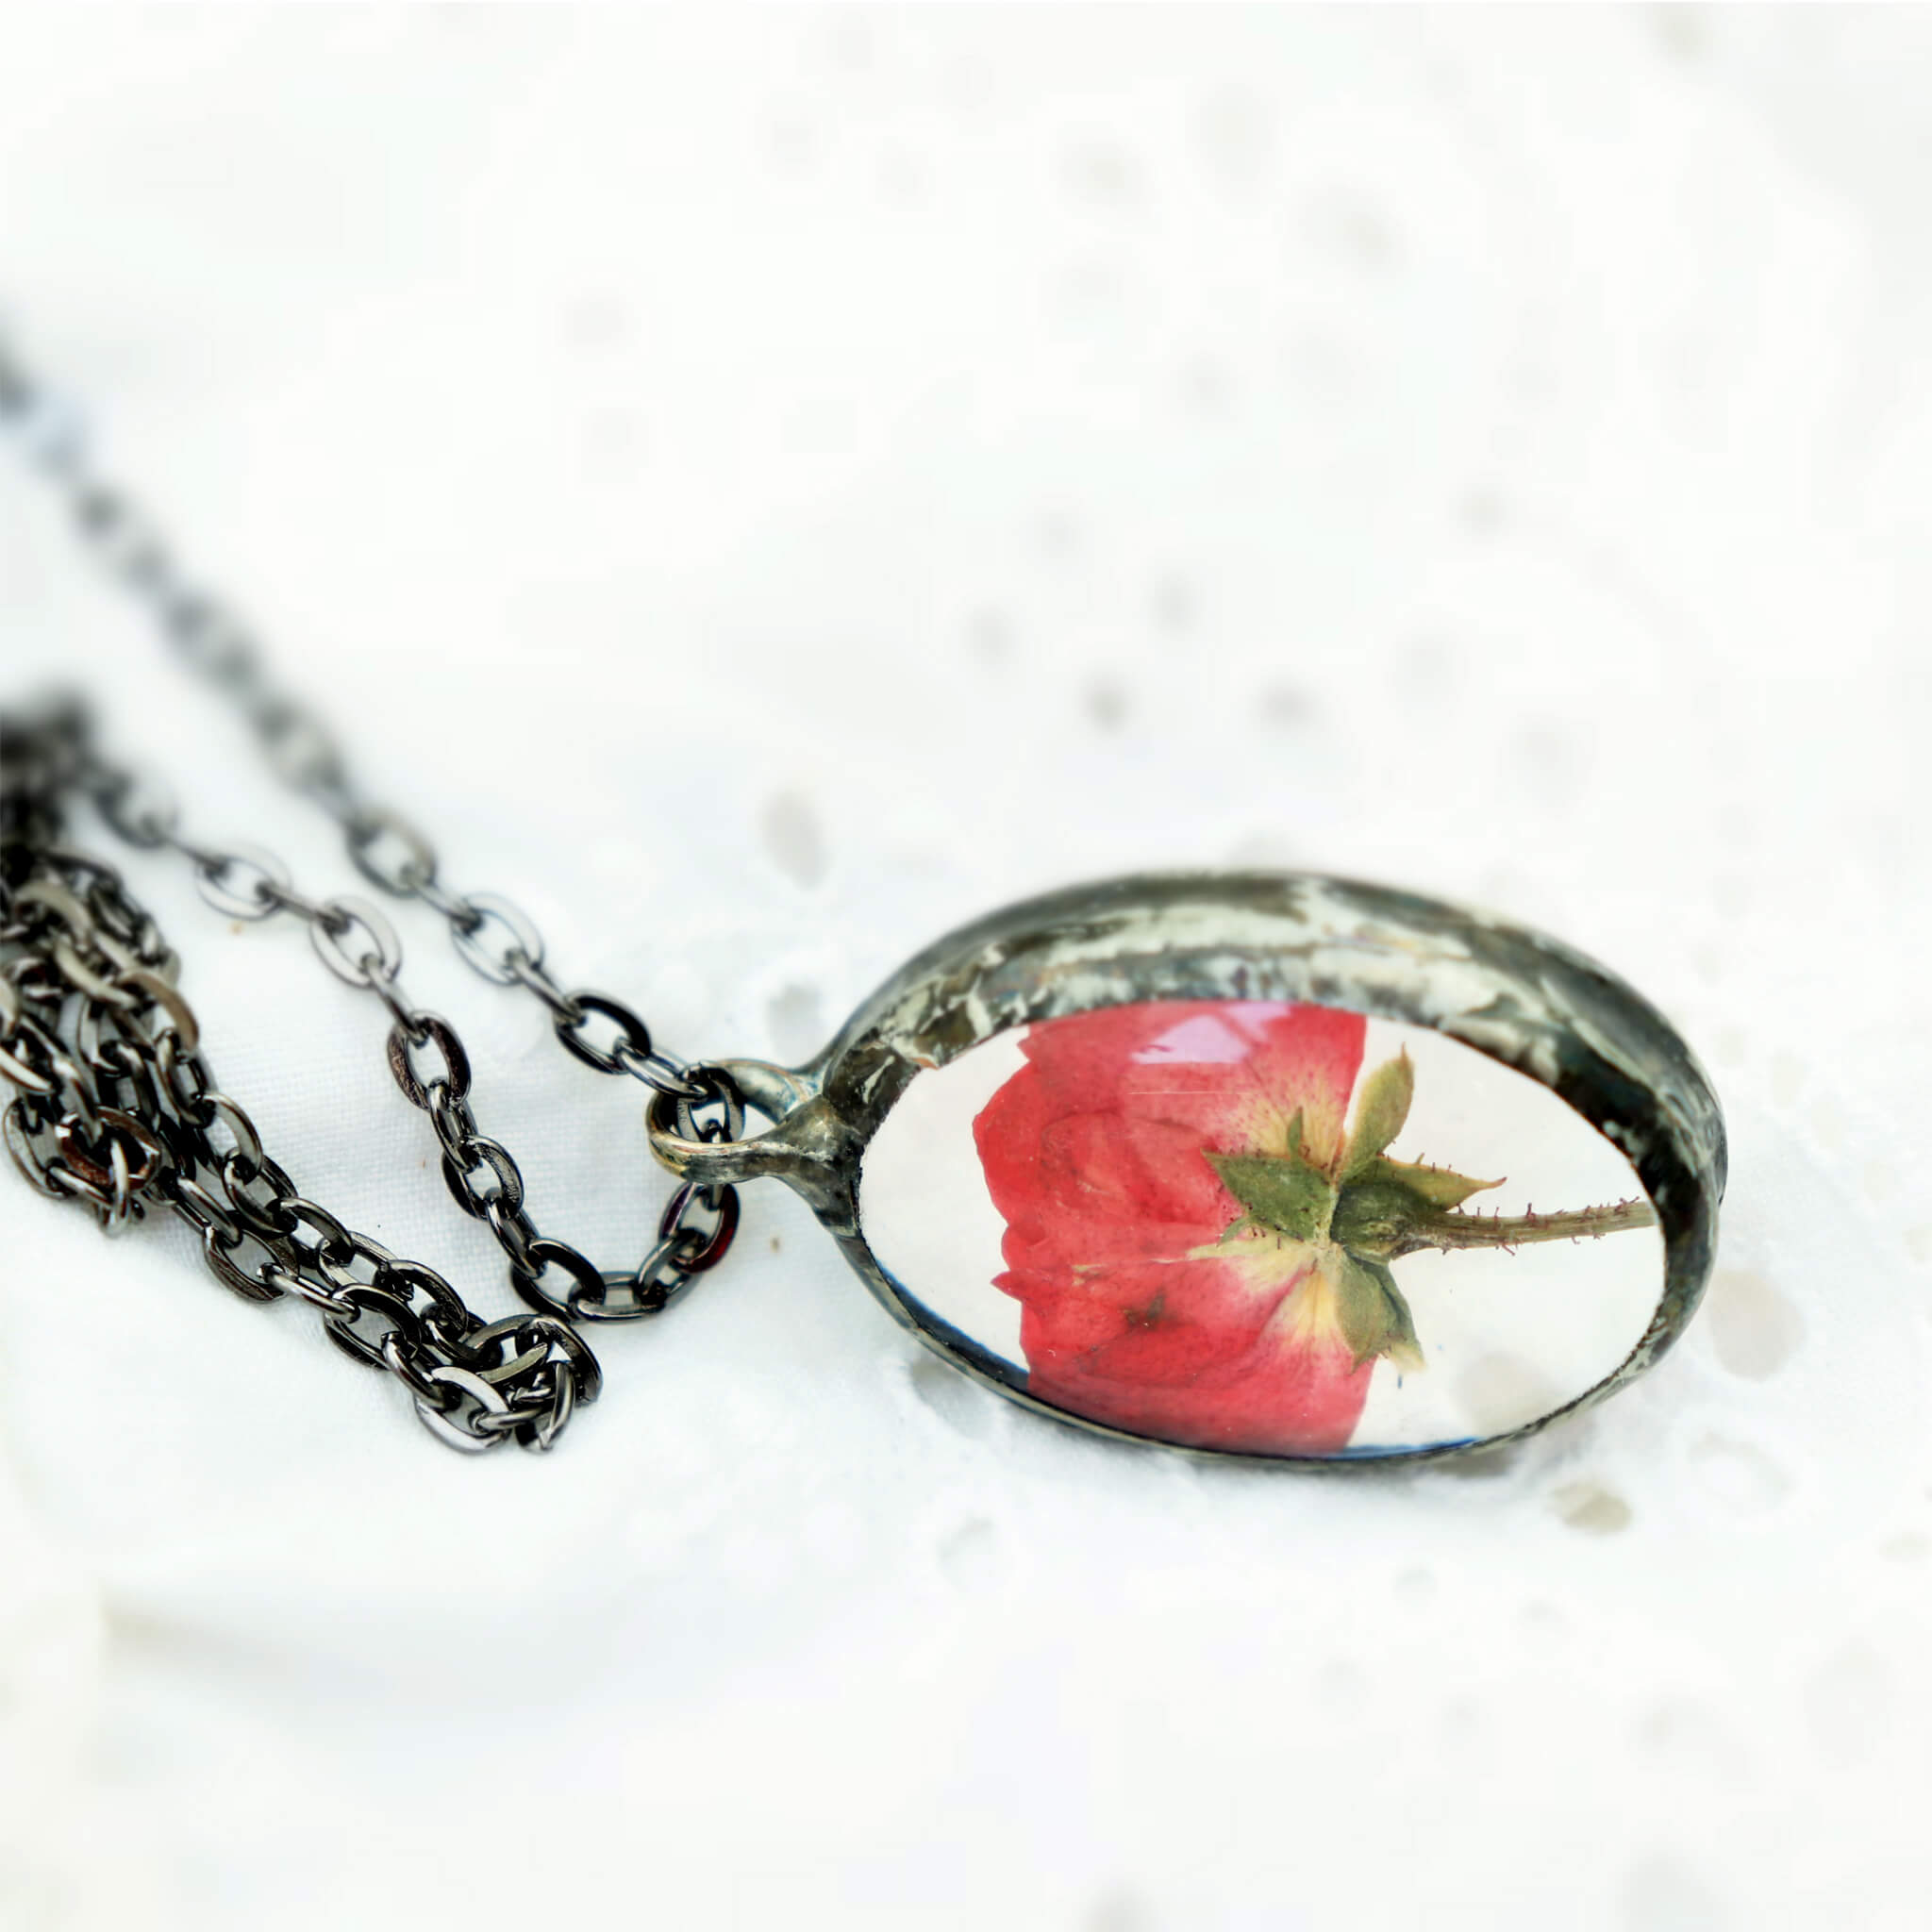 Pressed rose in soldered glass pendant necklace lying on white lace